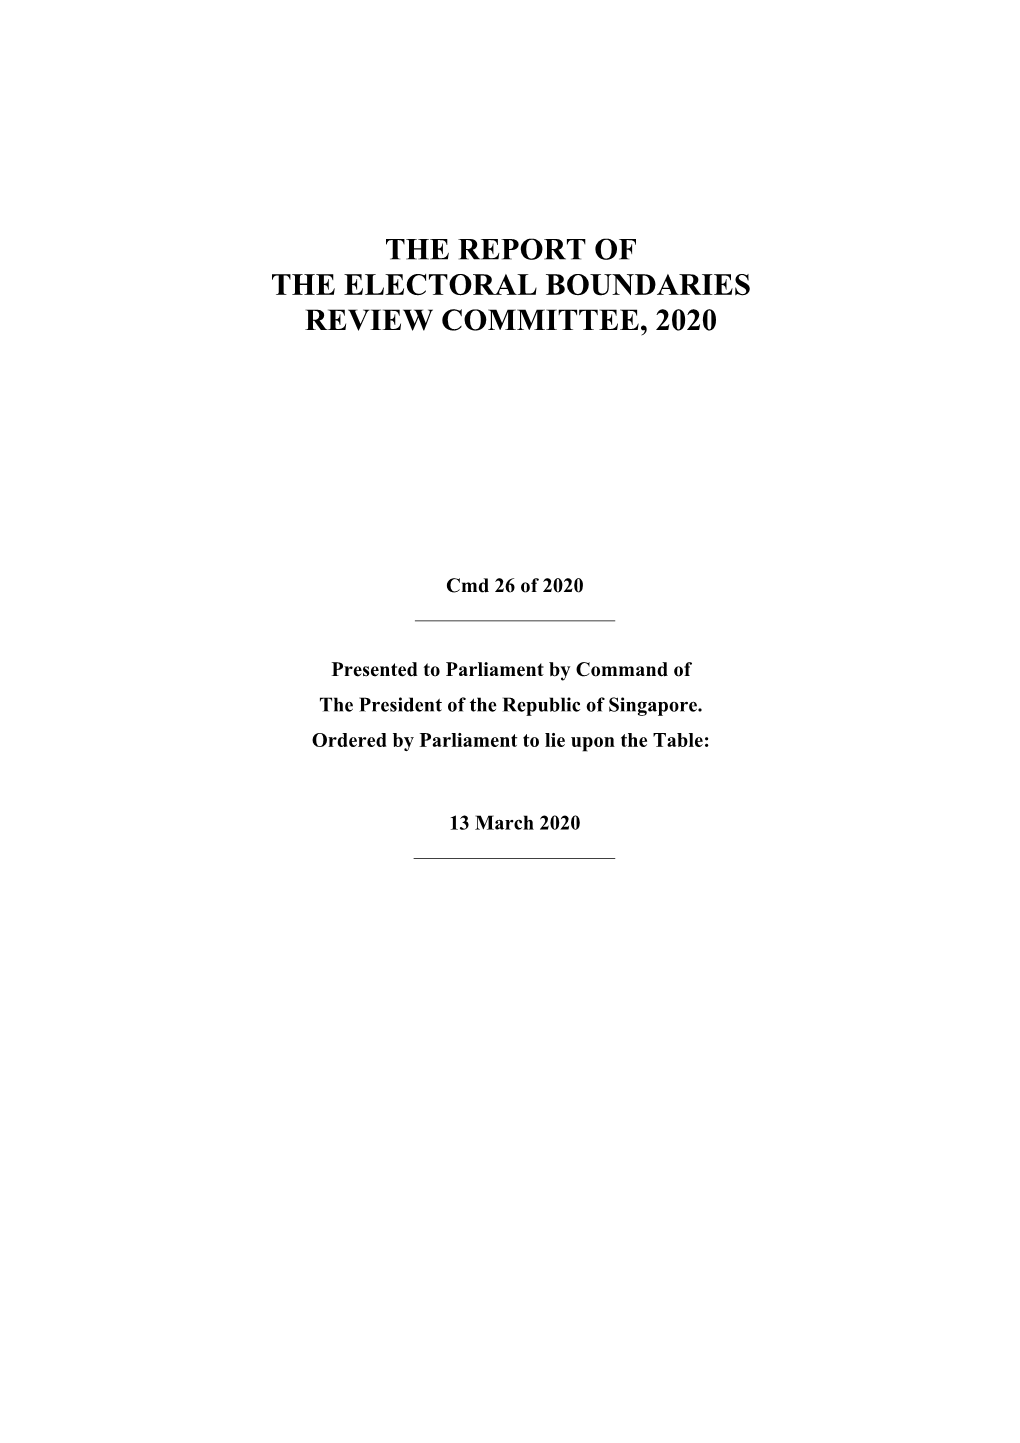 The Report of the Electoral Boundaries Review Committee, 2020